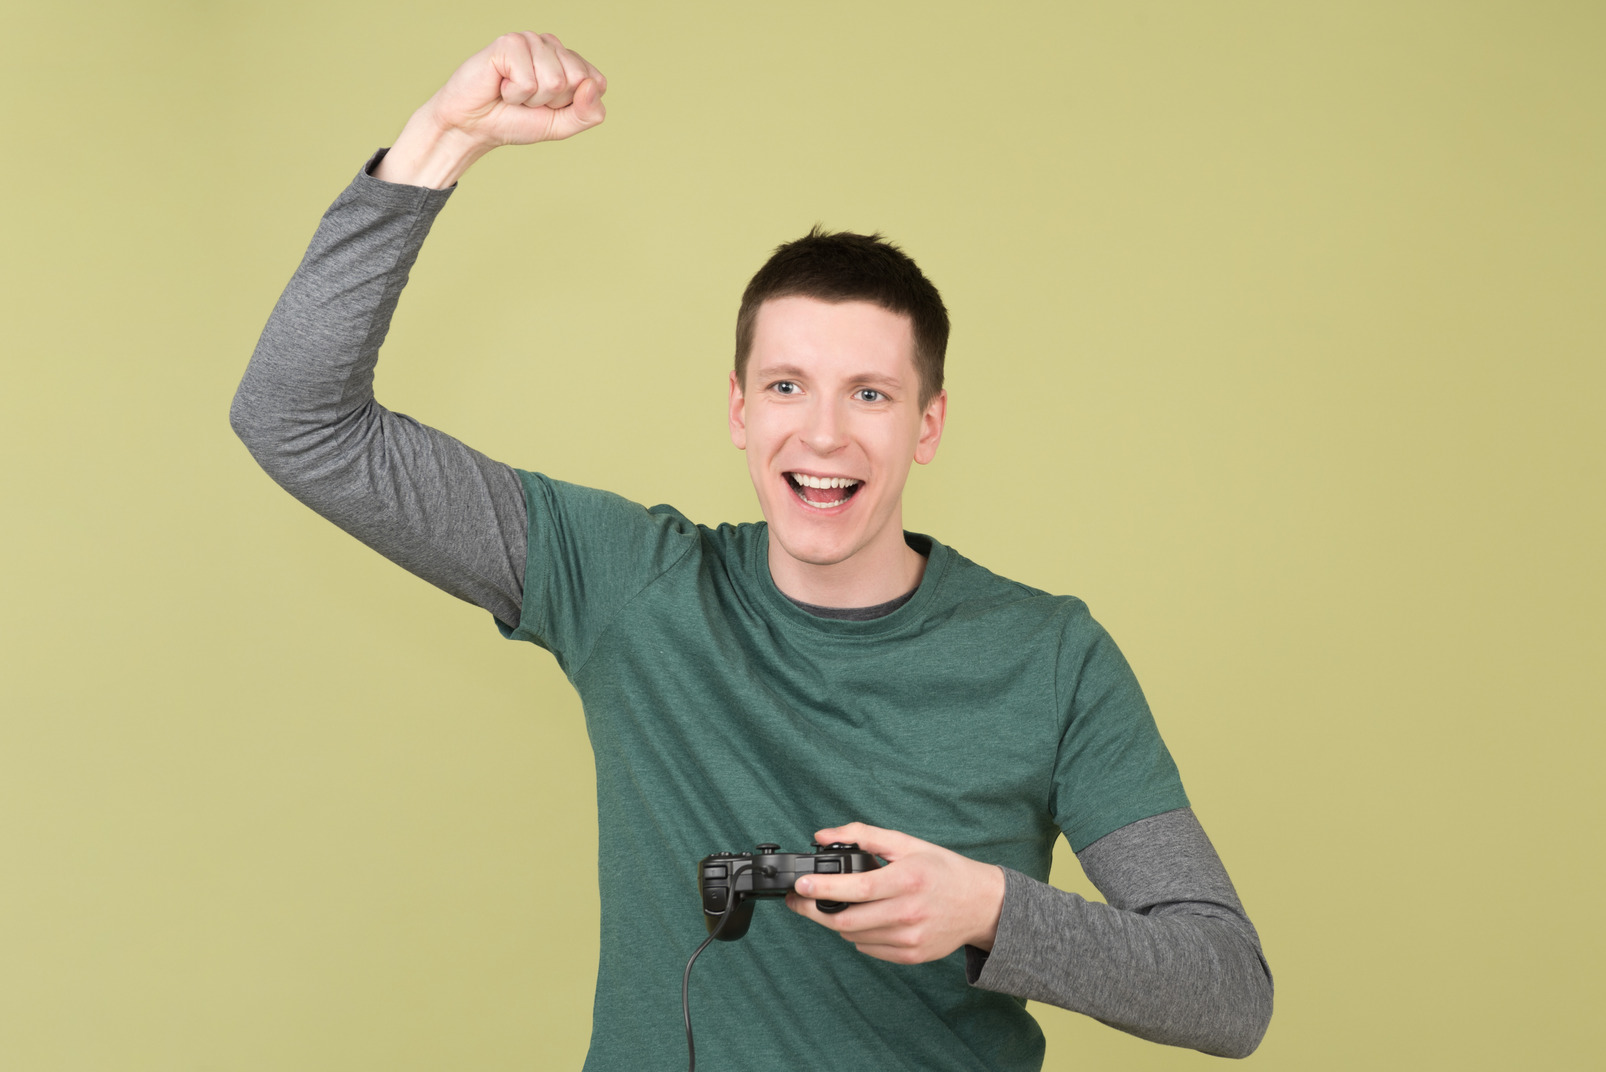 Happy and excited young man holding a joystick